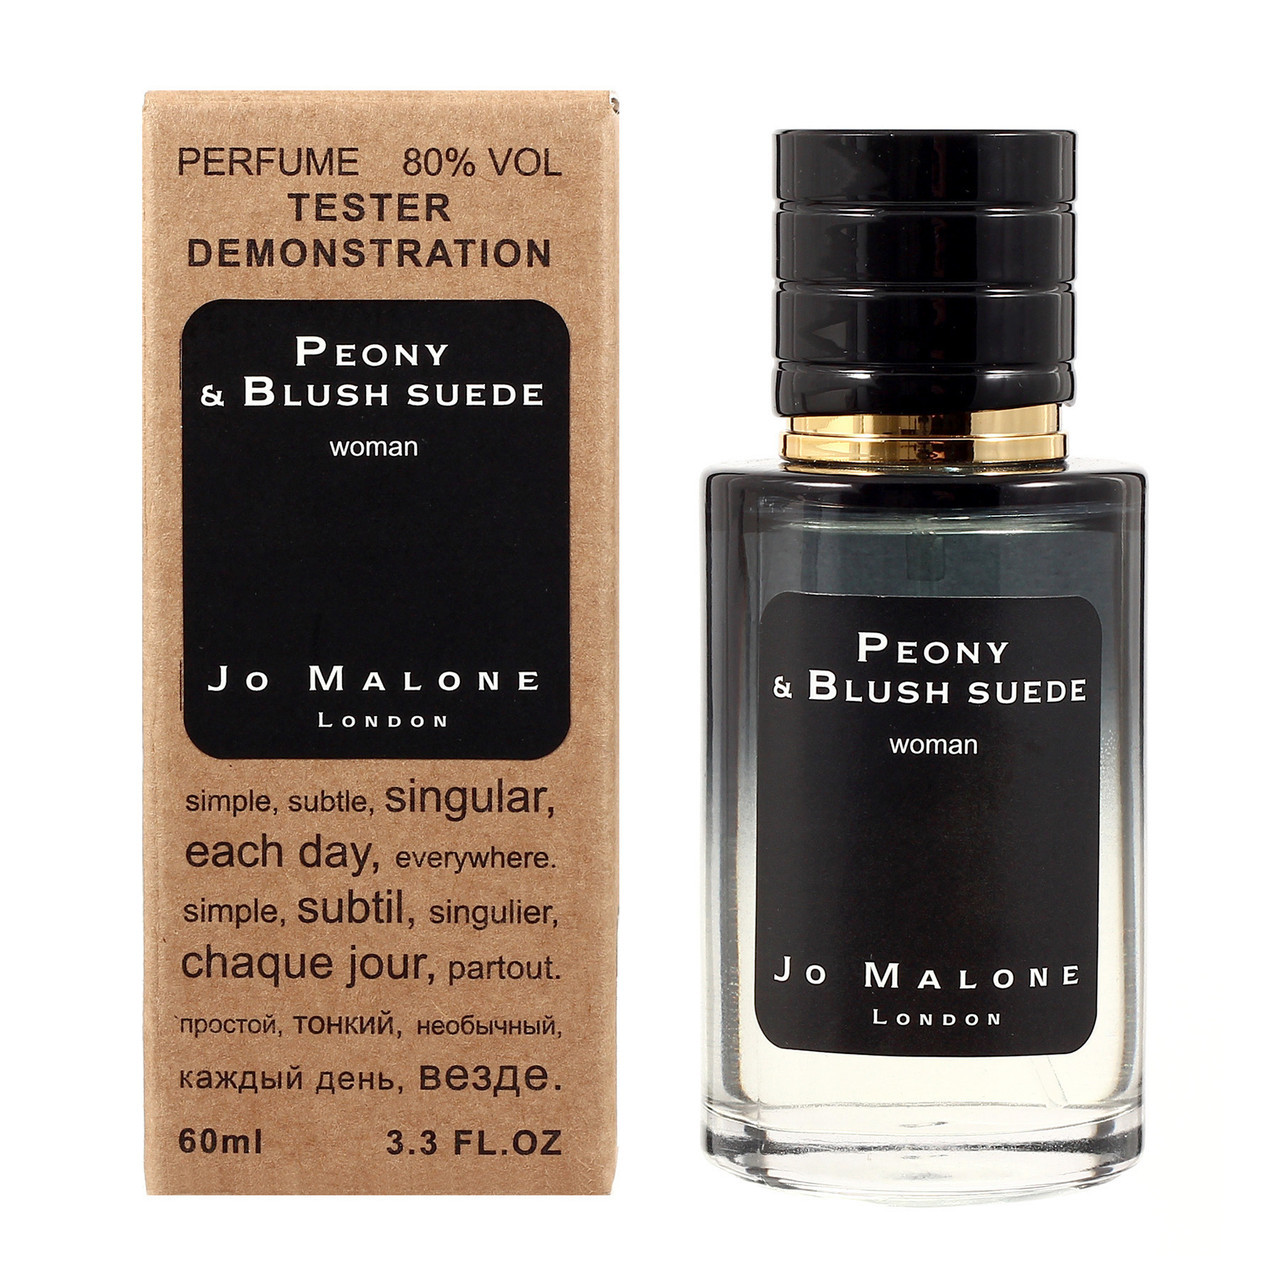 Jo Malone Peony & Blush Suede TESTER LUX, 60 мл